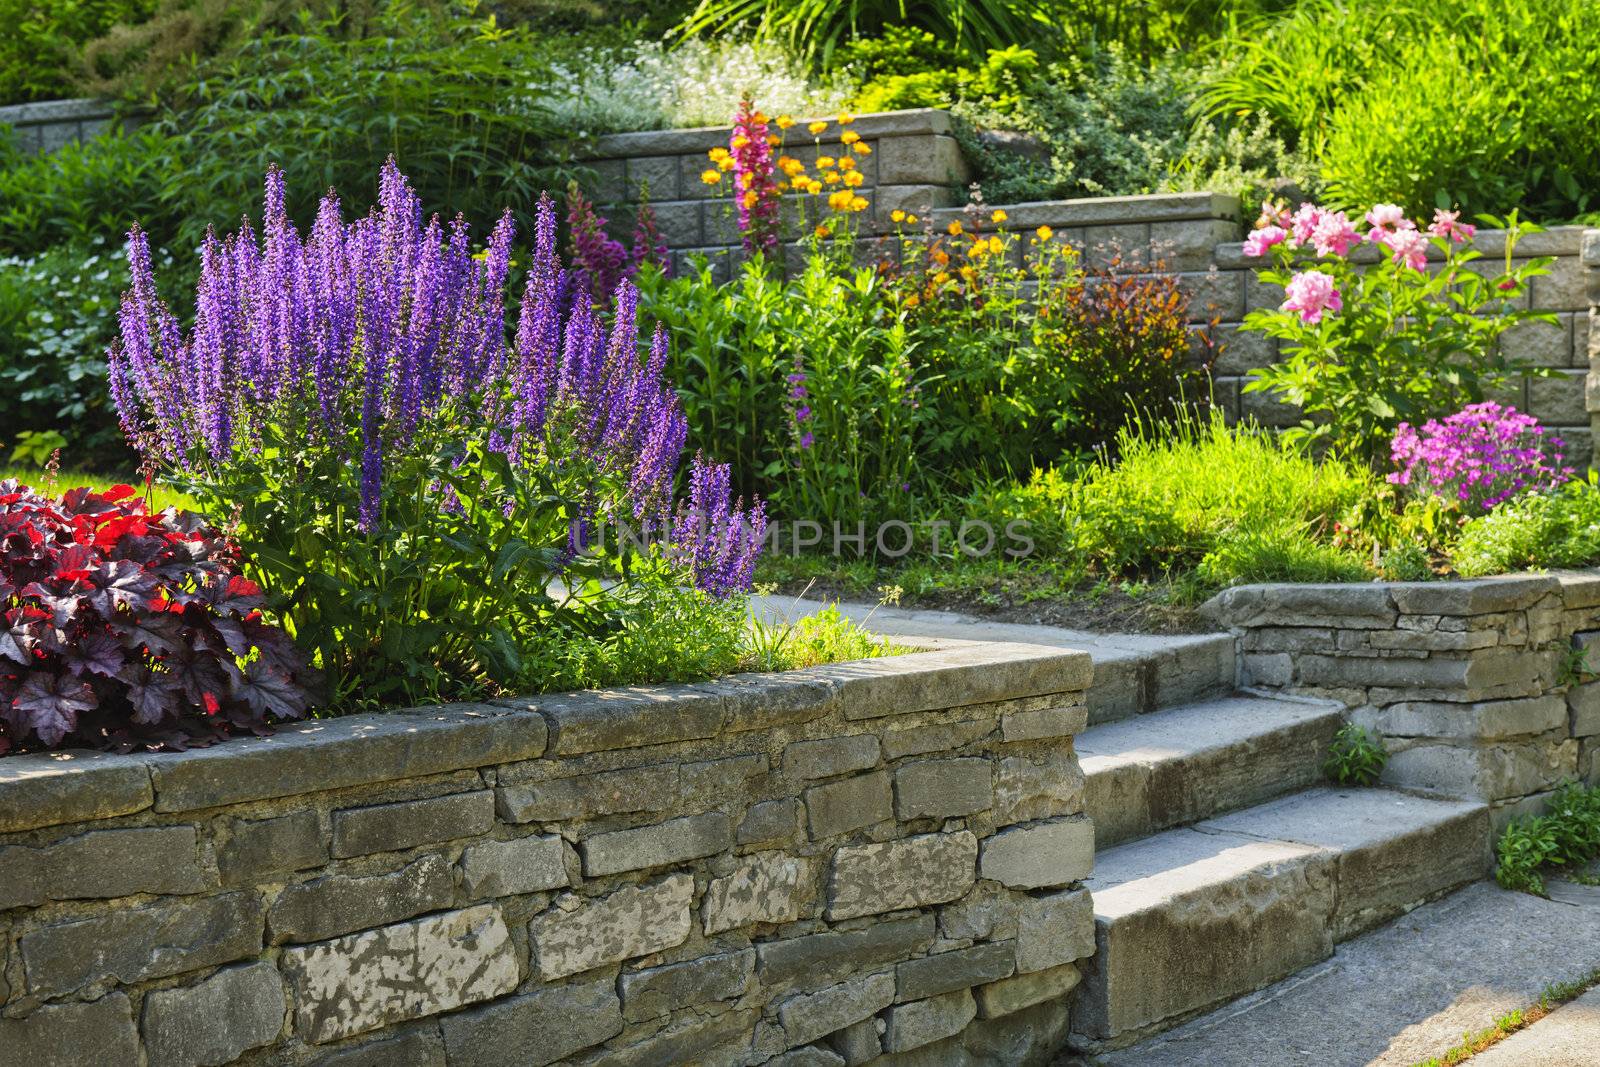 Natural stone landscaping in home garden with steps and flowerbeds